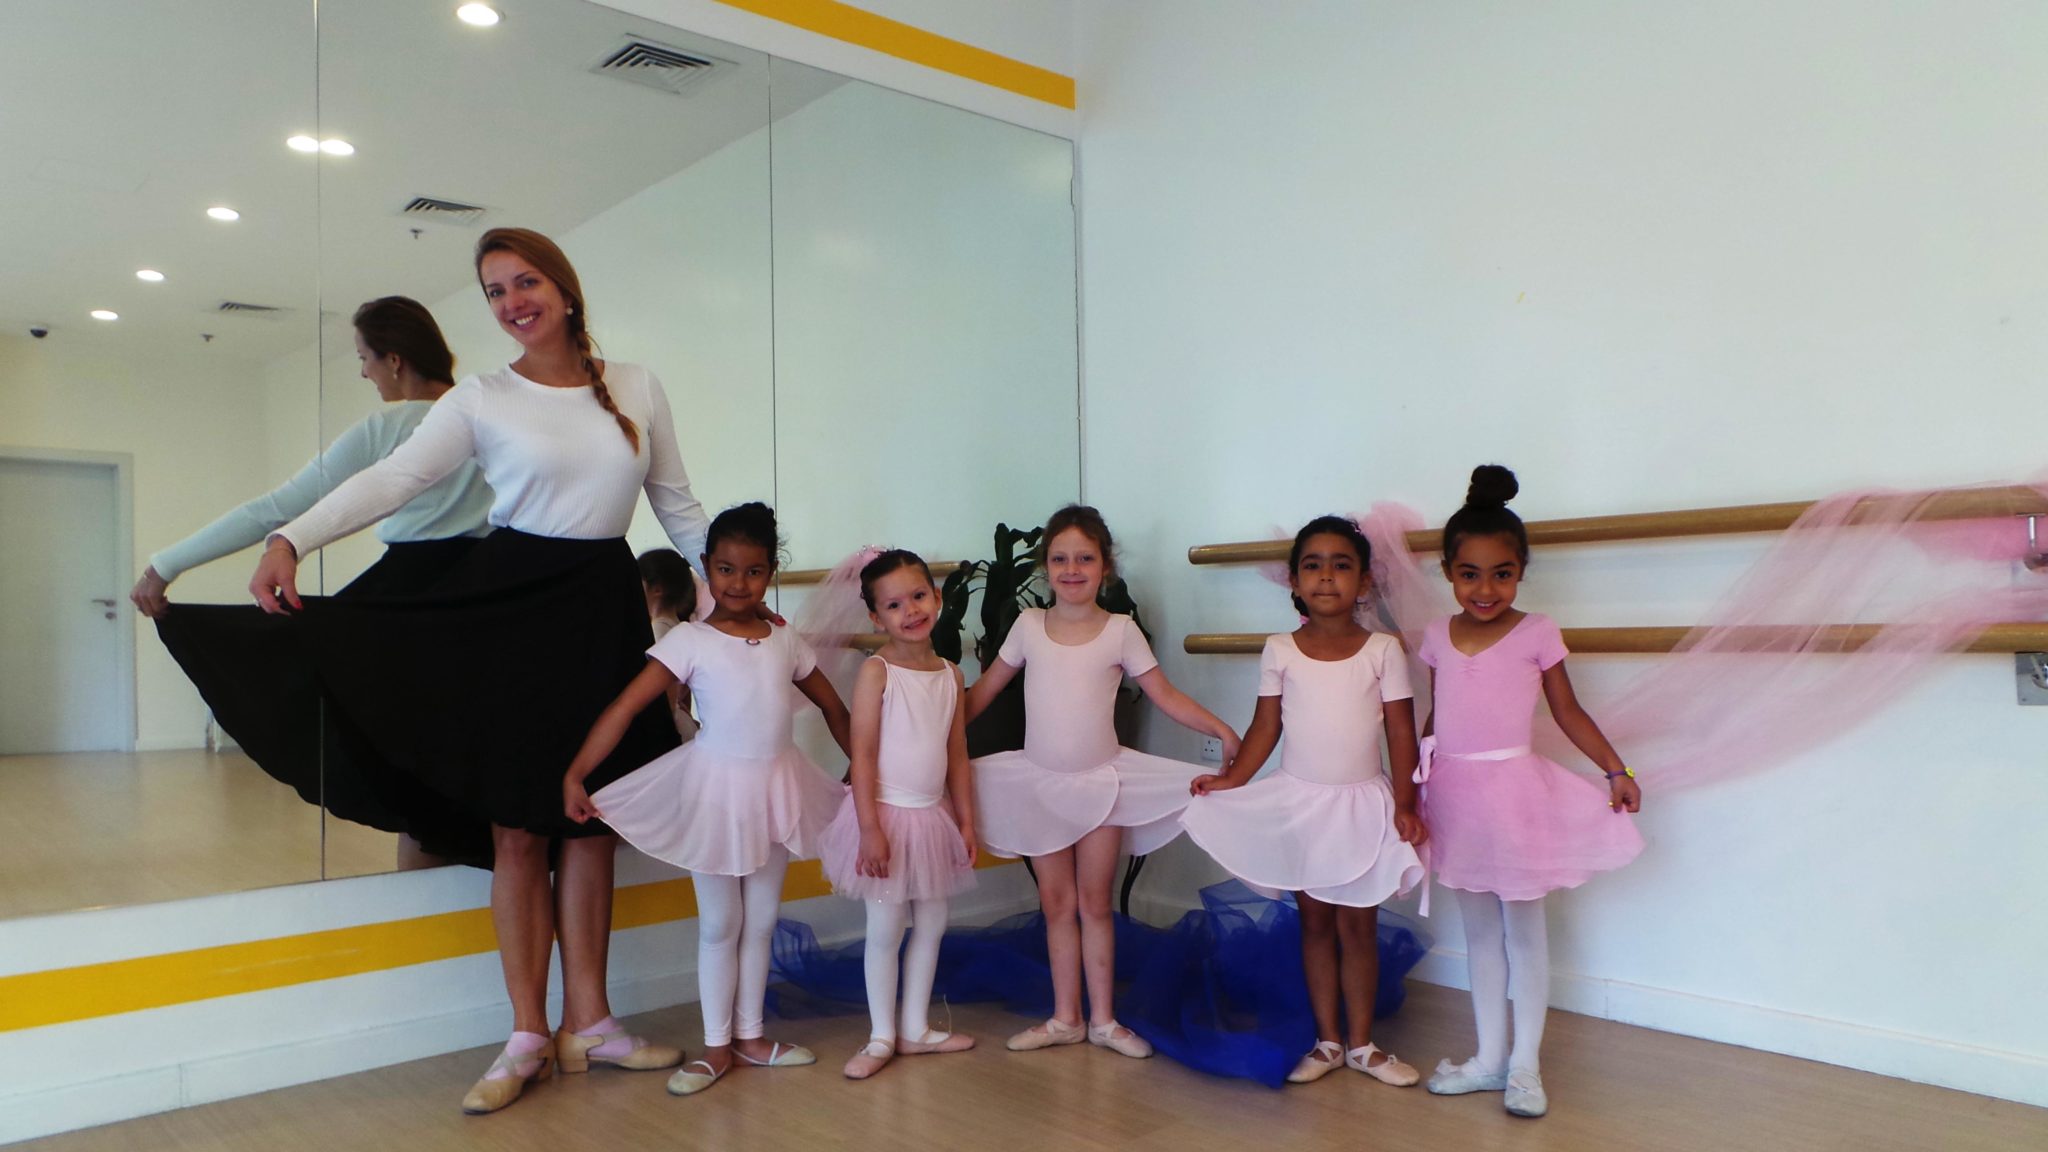 Buying the Right Shoes Before Starting Ballet Classes